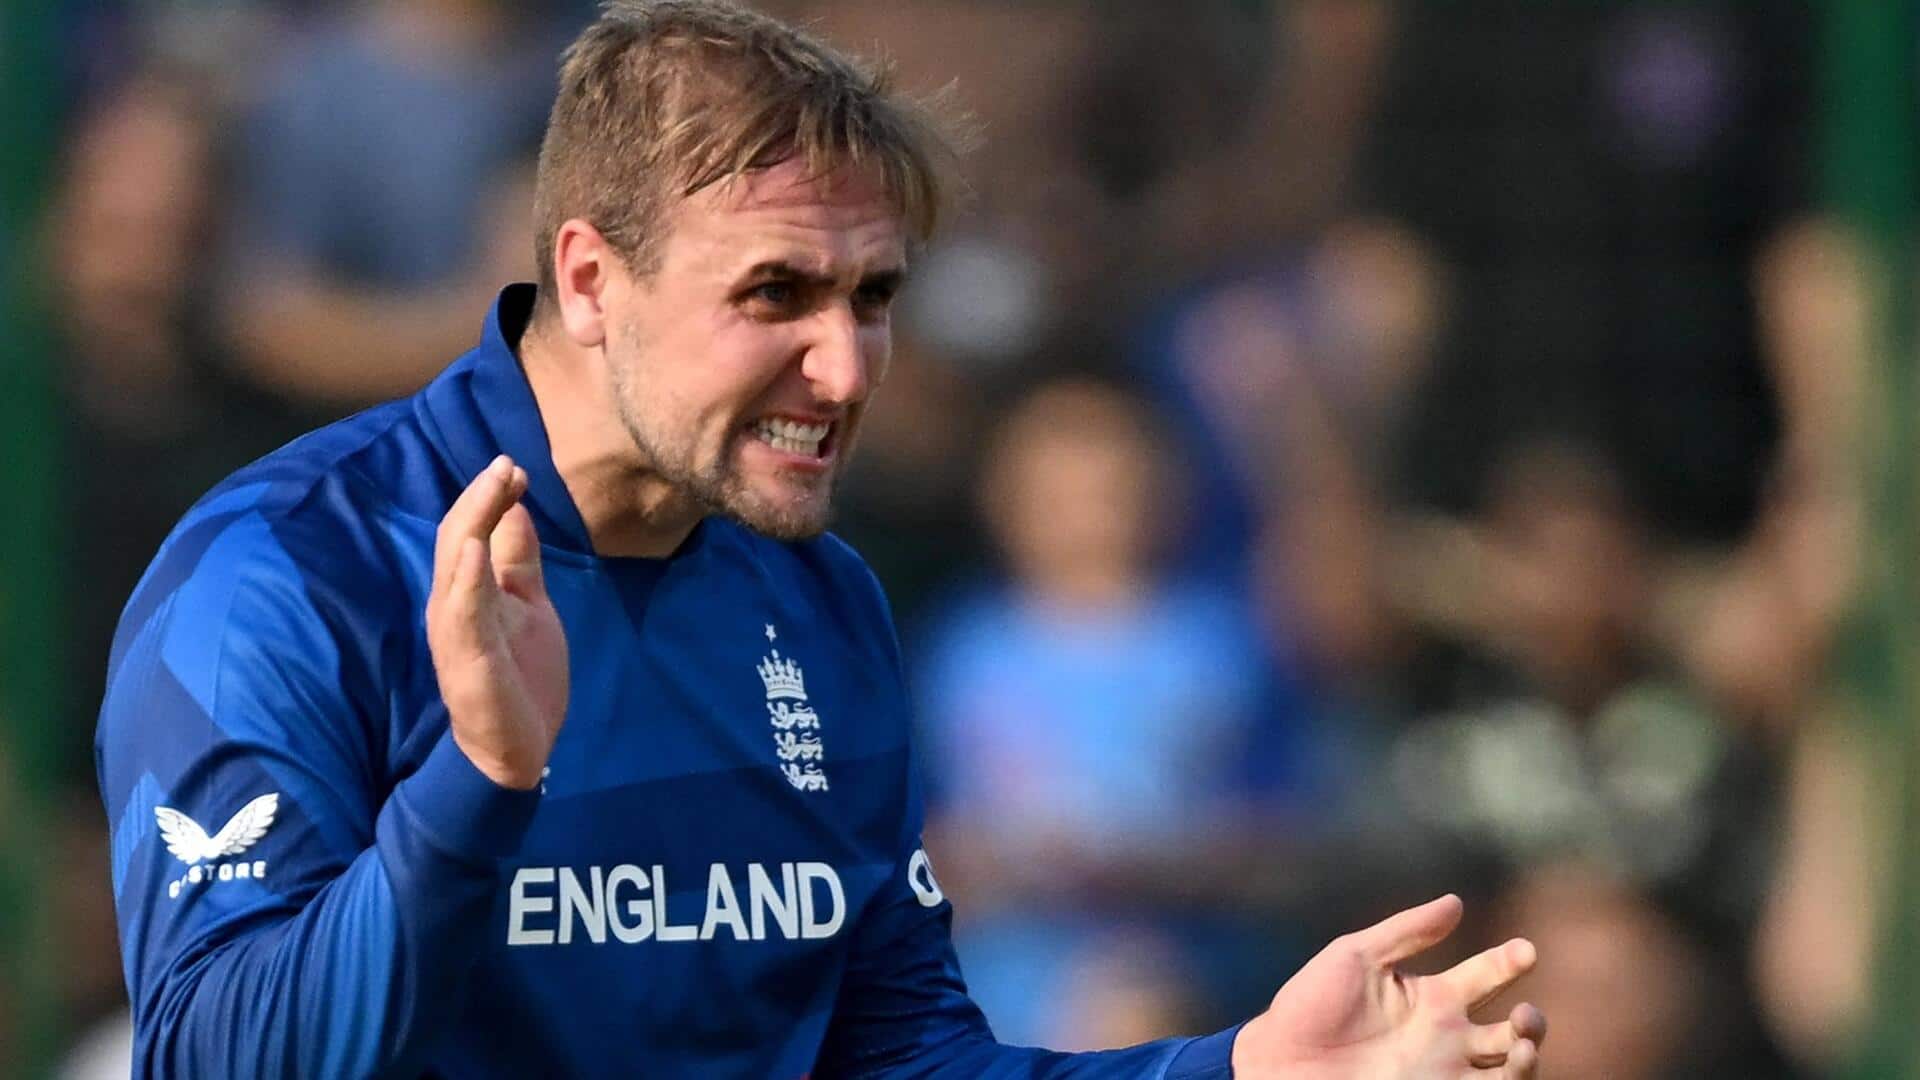 ICC Cricket World Cup, England spinners shine versus Afghanistan: Stats